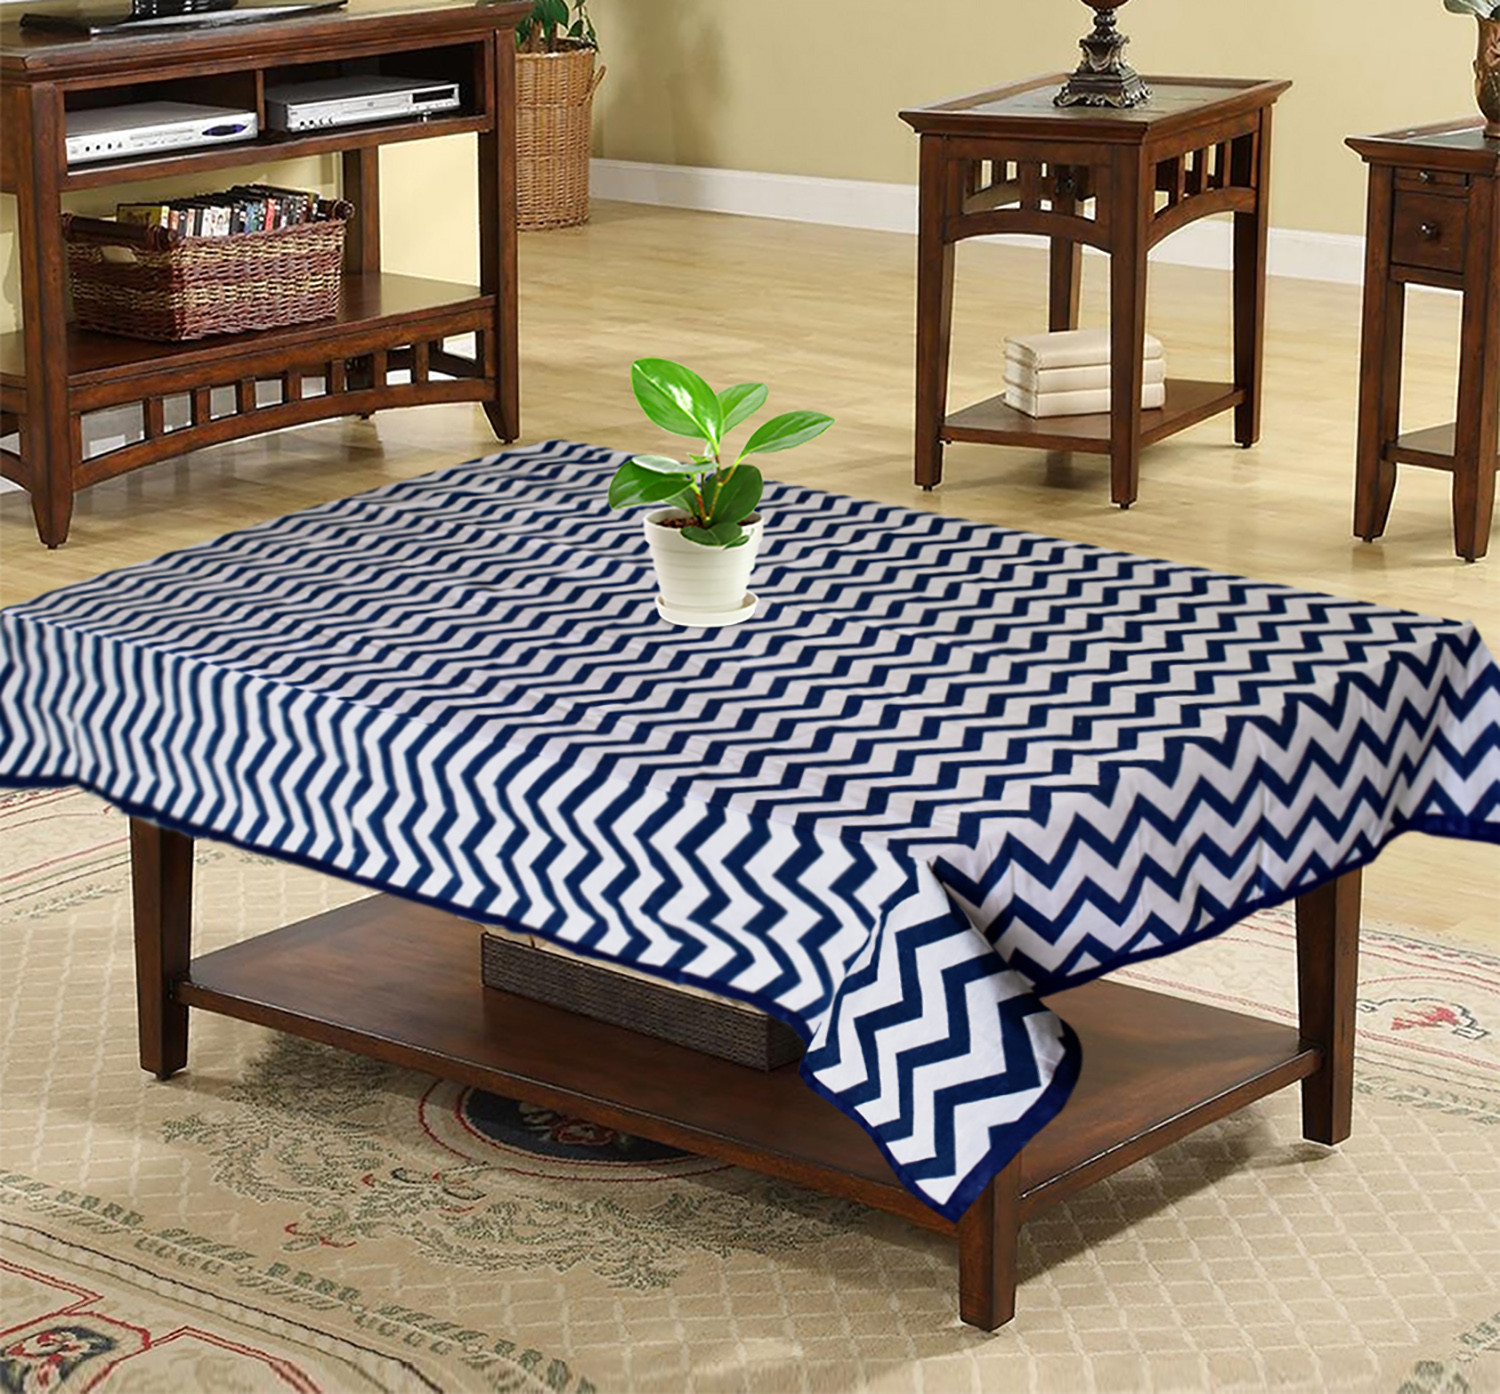 Kuber Industries Cotton Zig Zag Print 4 Seater Center Table Cover/Table Cloth For Home Decorative 60 In. x 40 In. (Blue) 54KM4378